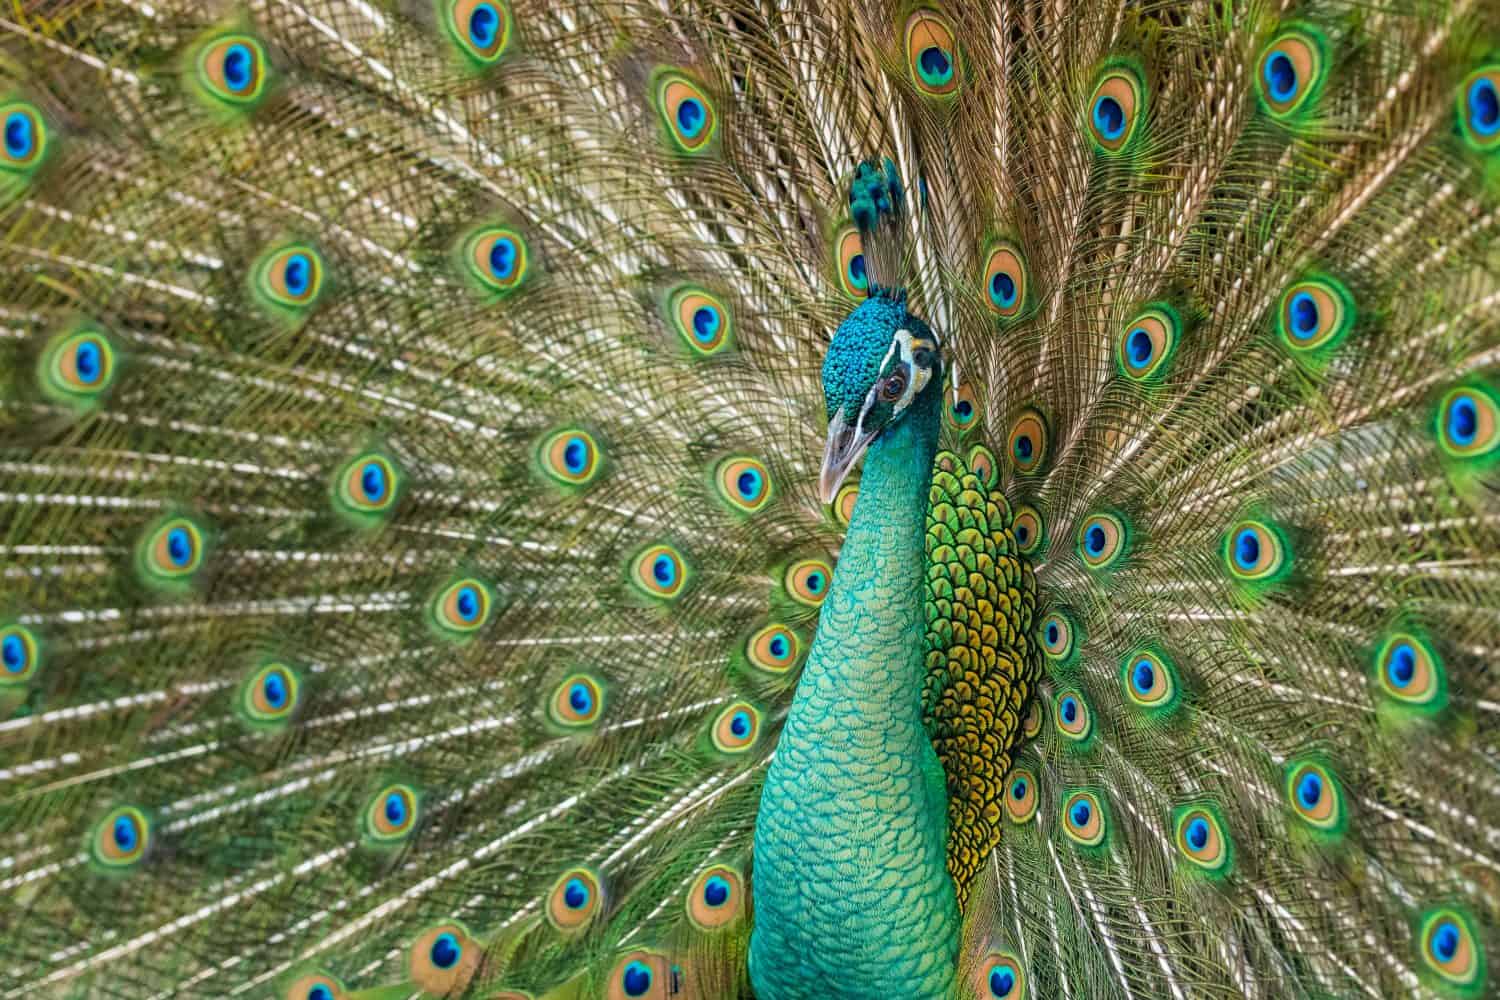 Close up male peacock with fully unfolded feathers of his tail. Male Peacock rattles his plumage during courtship